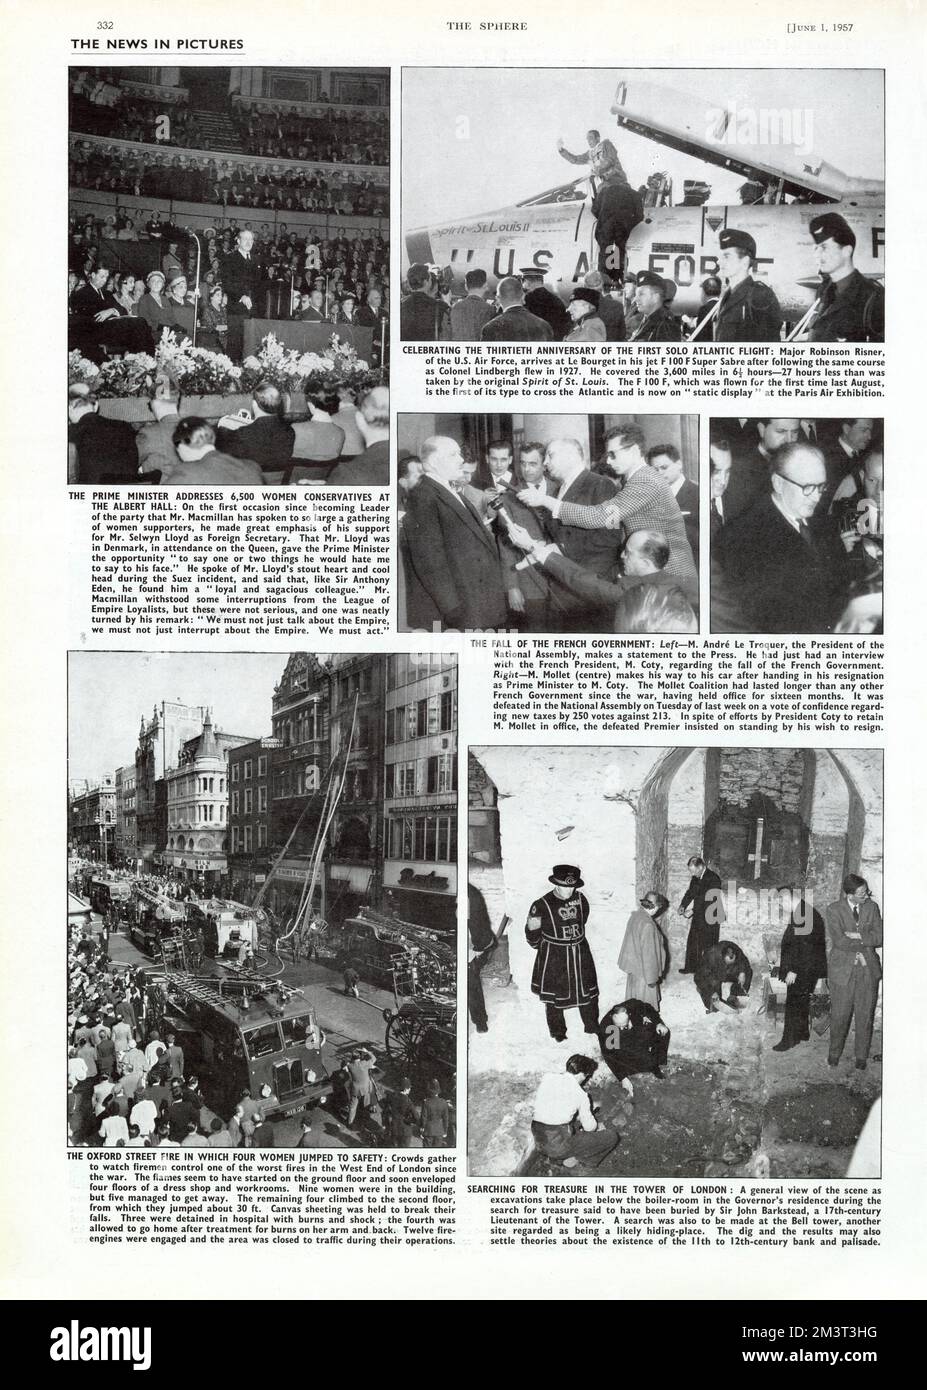 Whole magazine page from 'The Sphere' - June 1, 1957 p332 - featuring Prime Minister Harold Macmillan's address at the Royal Albert Hall to 6500 Women Conservatives,  a celebration of the 30th Anniversary of the first solo transatlantic flight (Major Robinson Rinser recreating Charles Lindbergh's pioneering flight of 1927 in a F 100 F Super Sabre), the Fall of the French Government, a fire on Oxford Street, London and an archaeological dig underway at The Tower of London (below the Boiler Room of the Governor's residence).     Date: 1957 Stock Photo